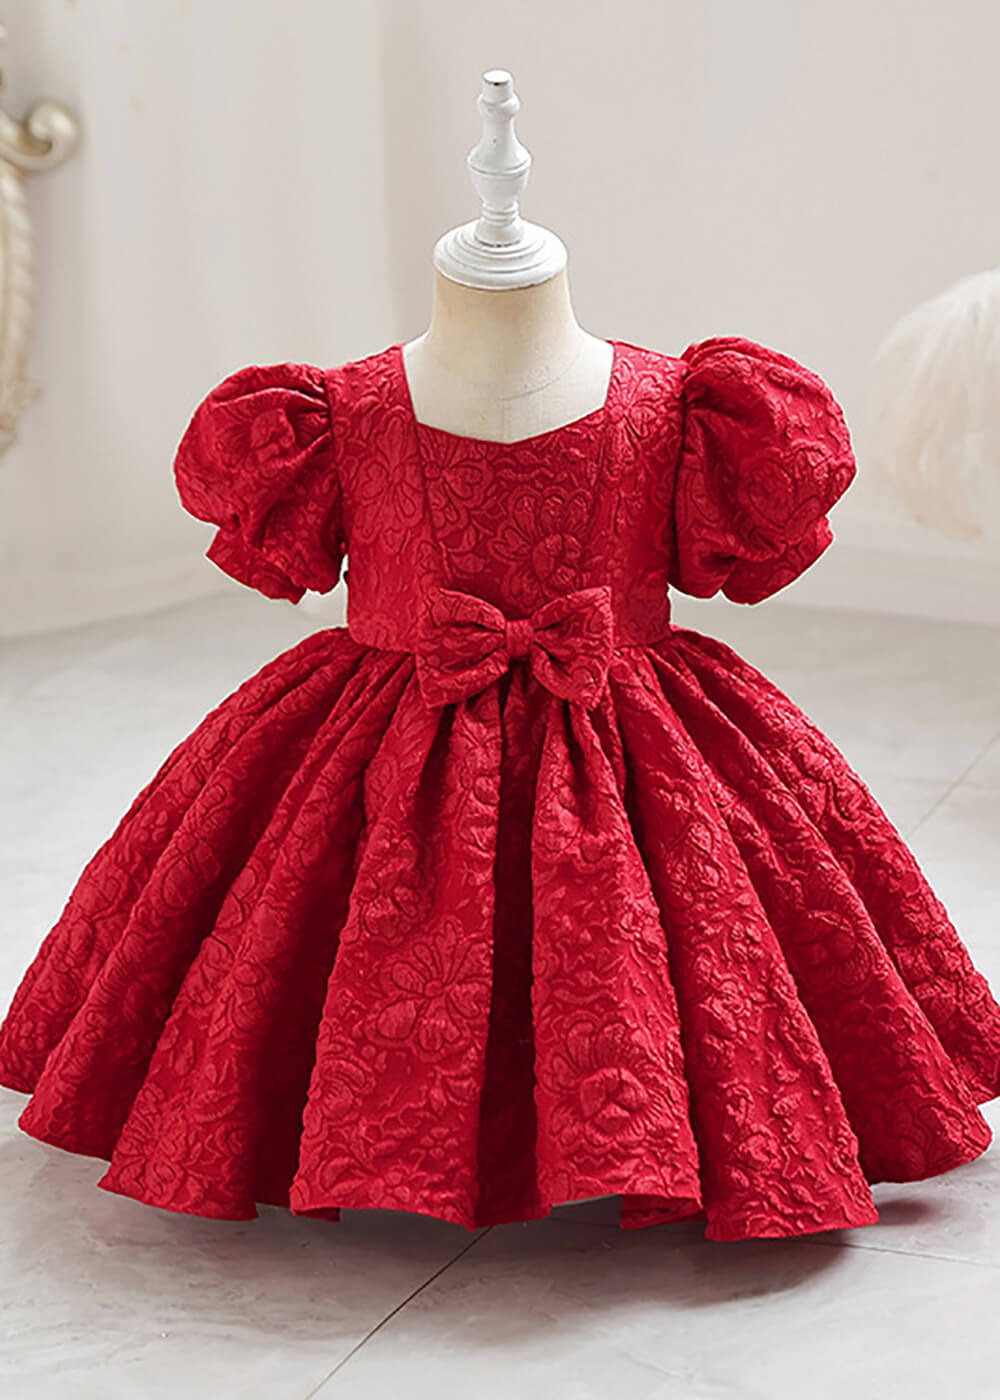 Square Neck Puff Sleeve Princess Printing Flower Girl Dress with Bow